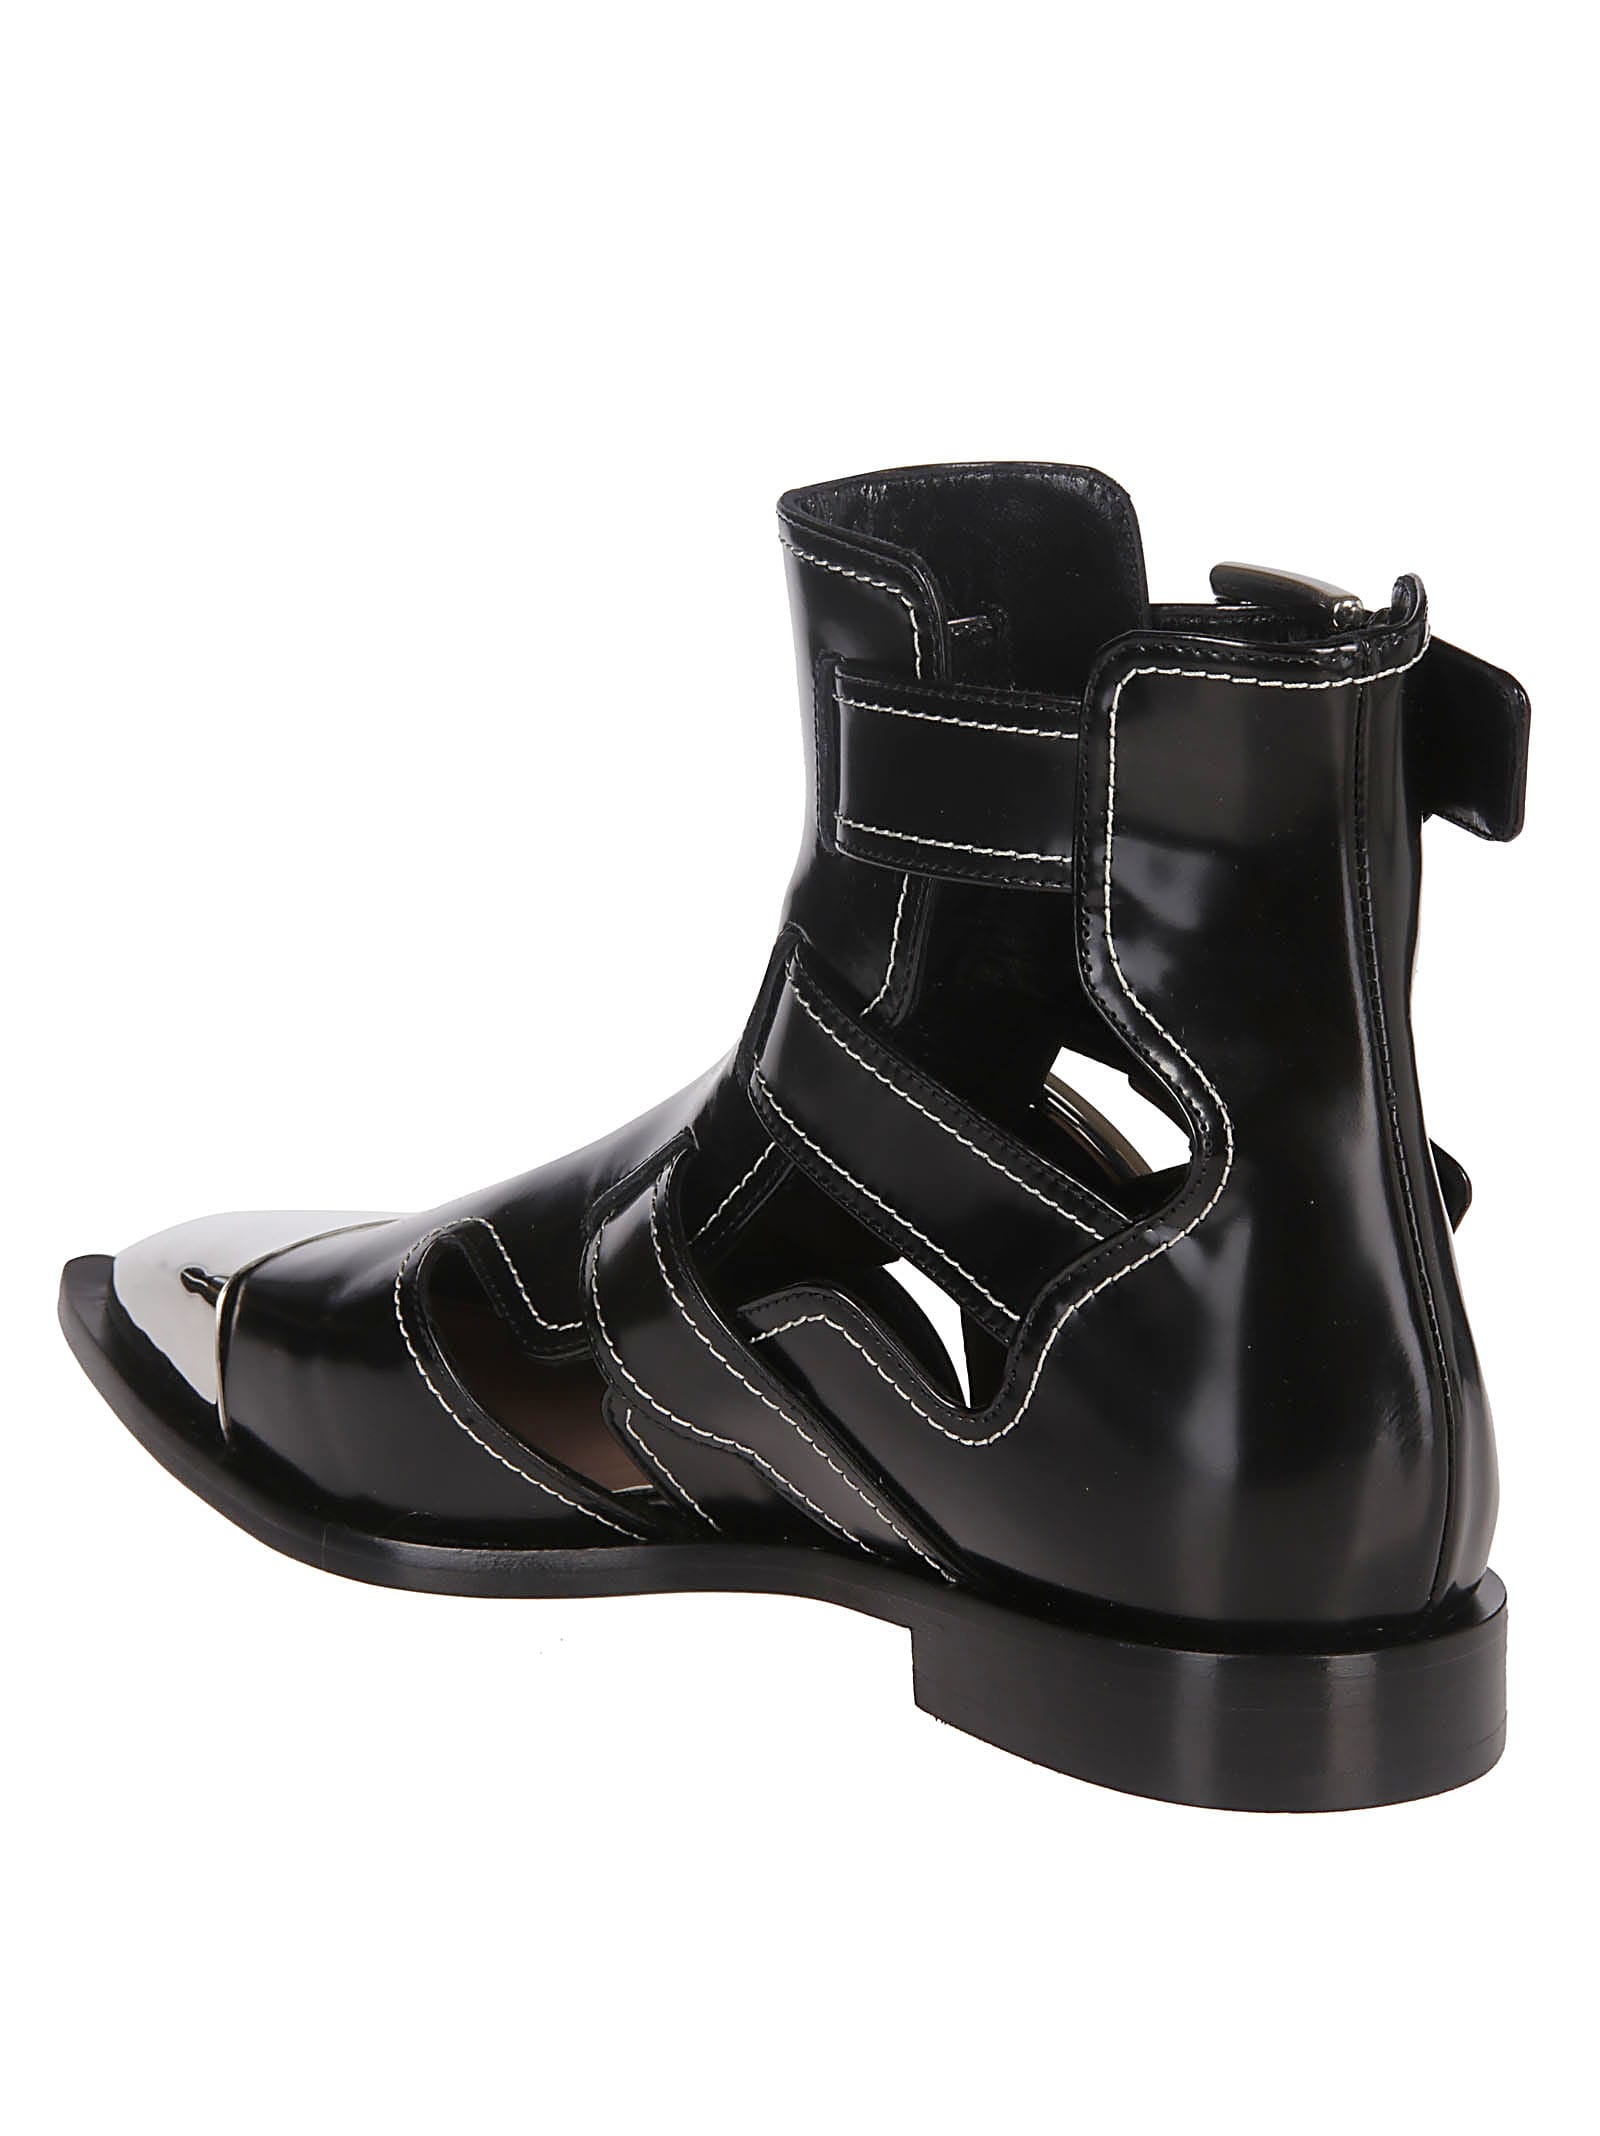 alexander mcqueen caged ankle boots